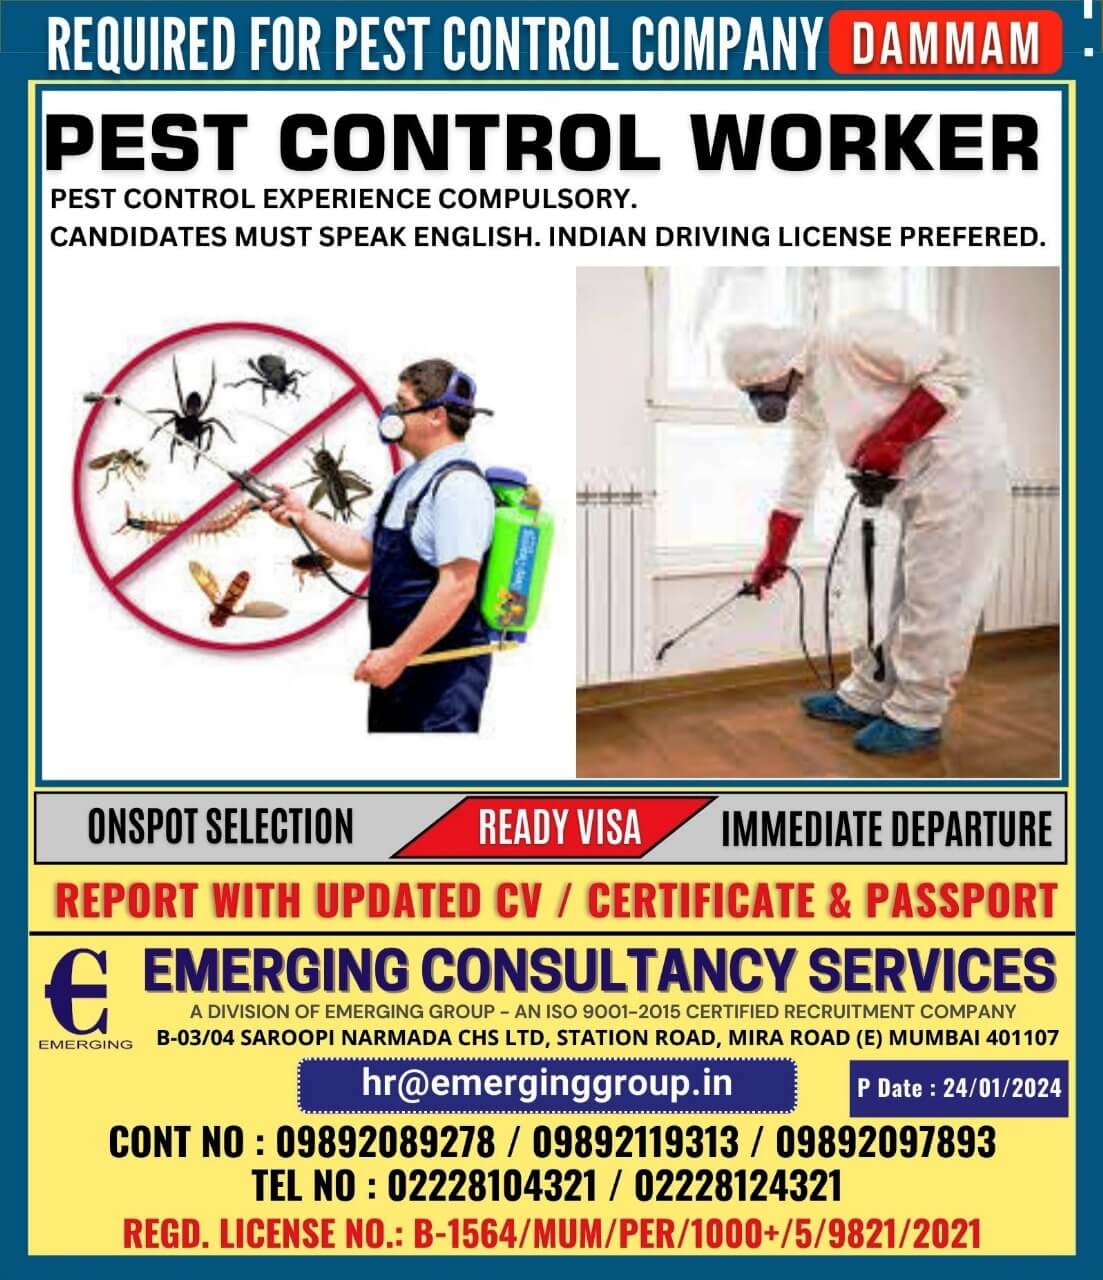 URGENTLY REQUIRED FOR LEADING  PEST CONTROL COMPANY - DAMMAM - SAUDI ARABIA